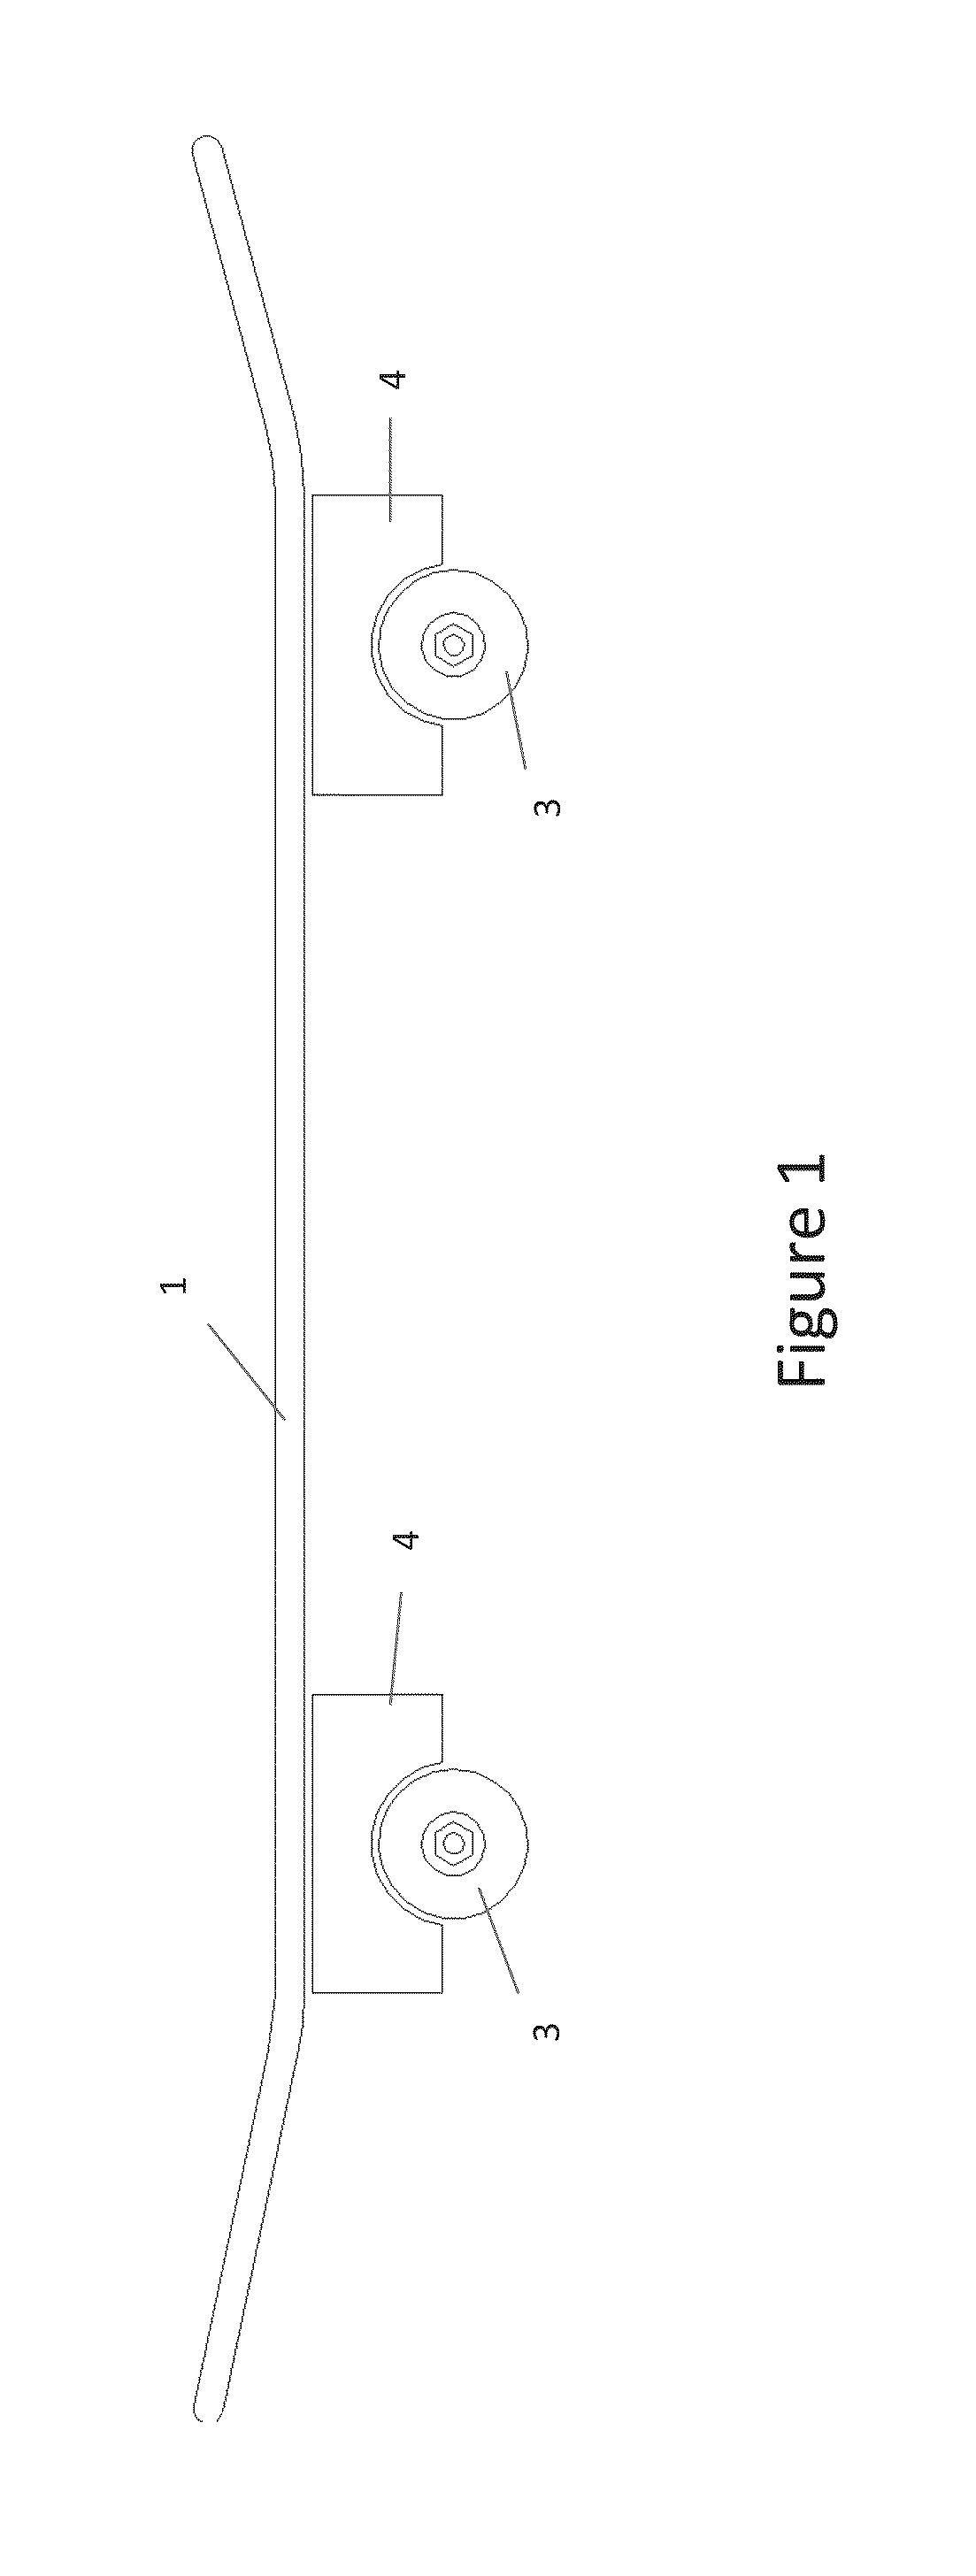 Device for limiting rotation of a wheel